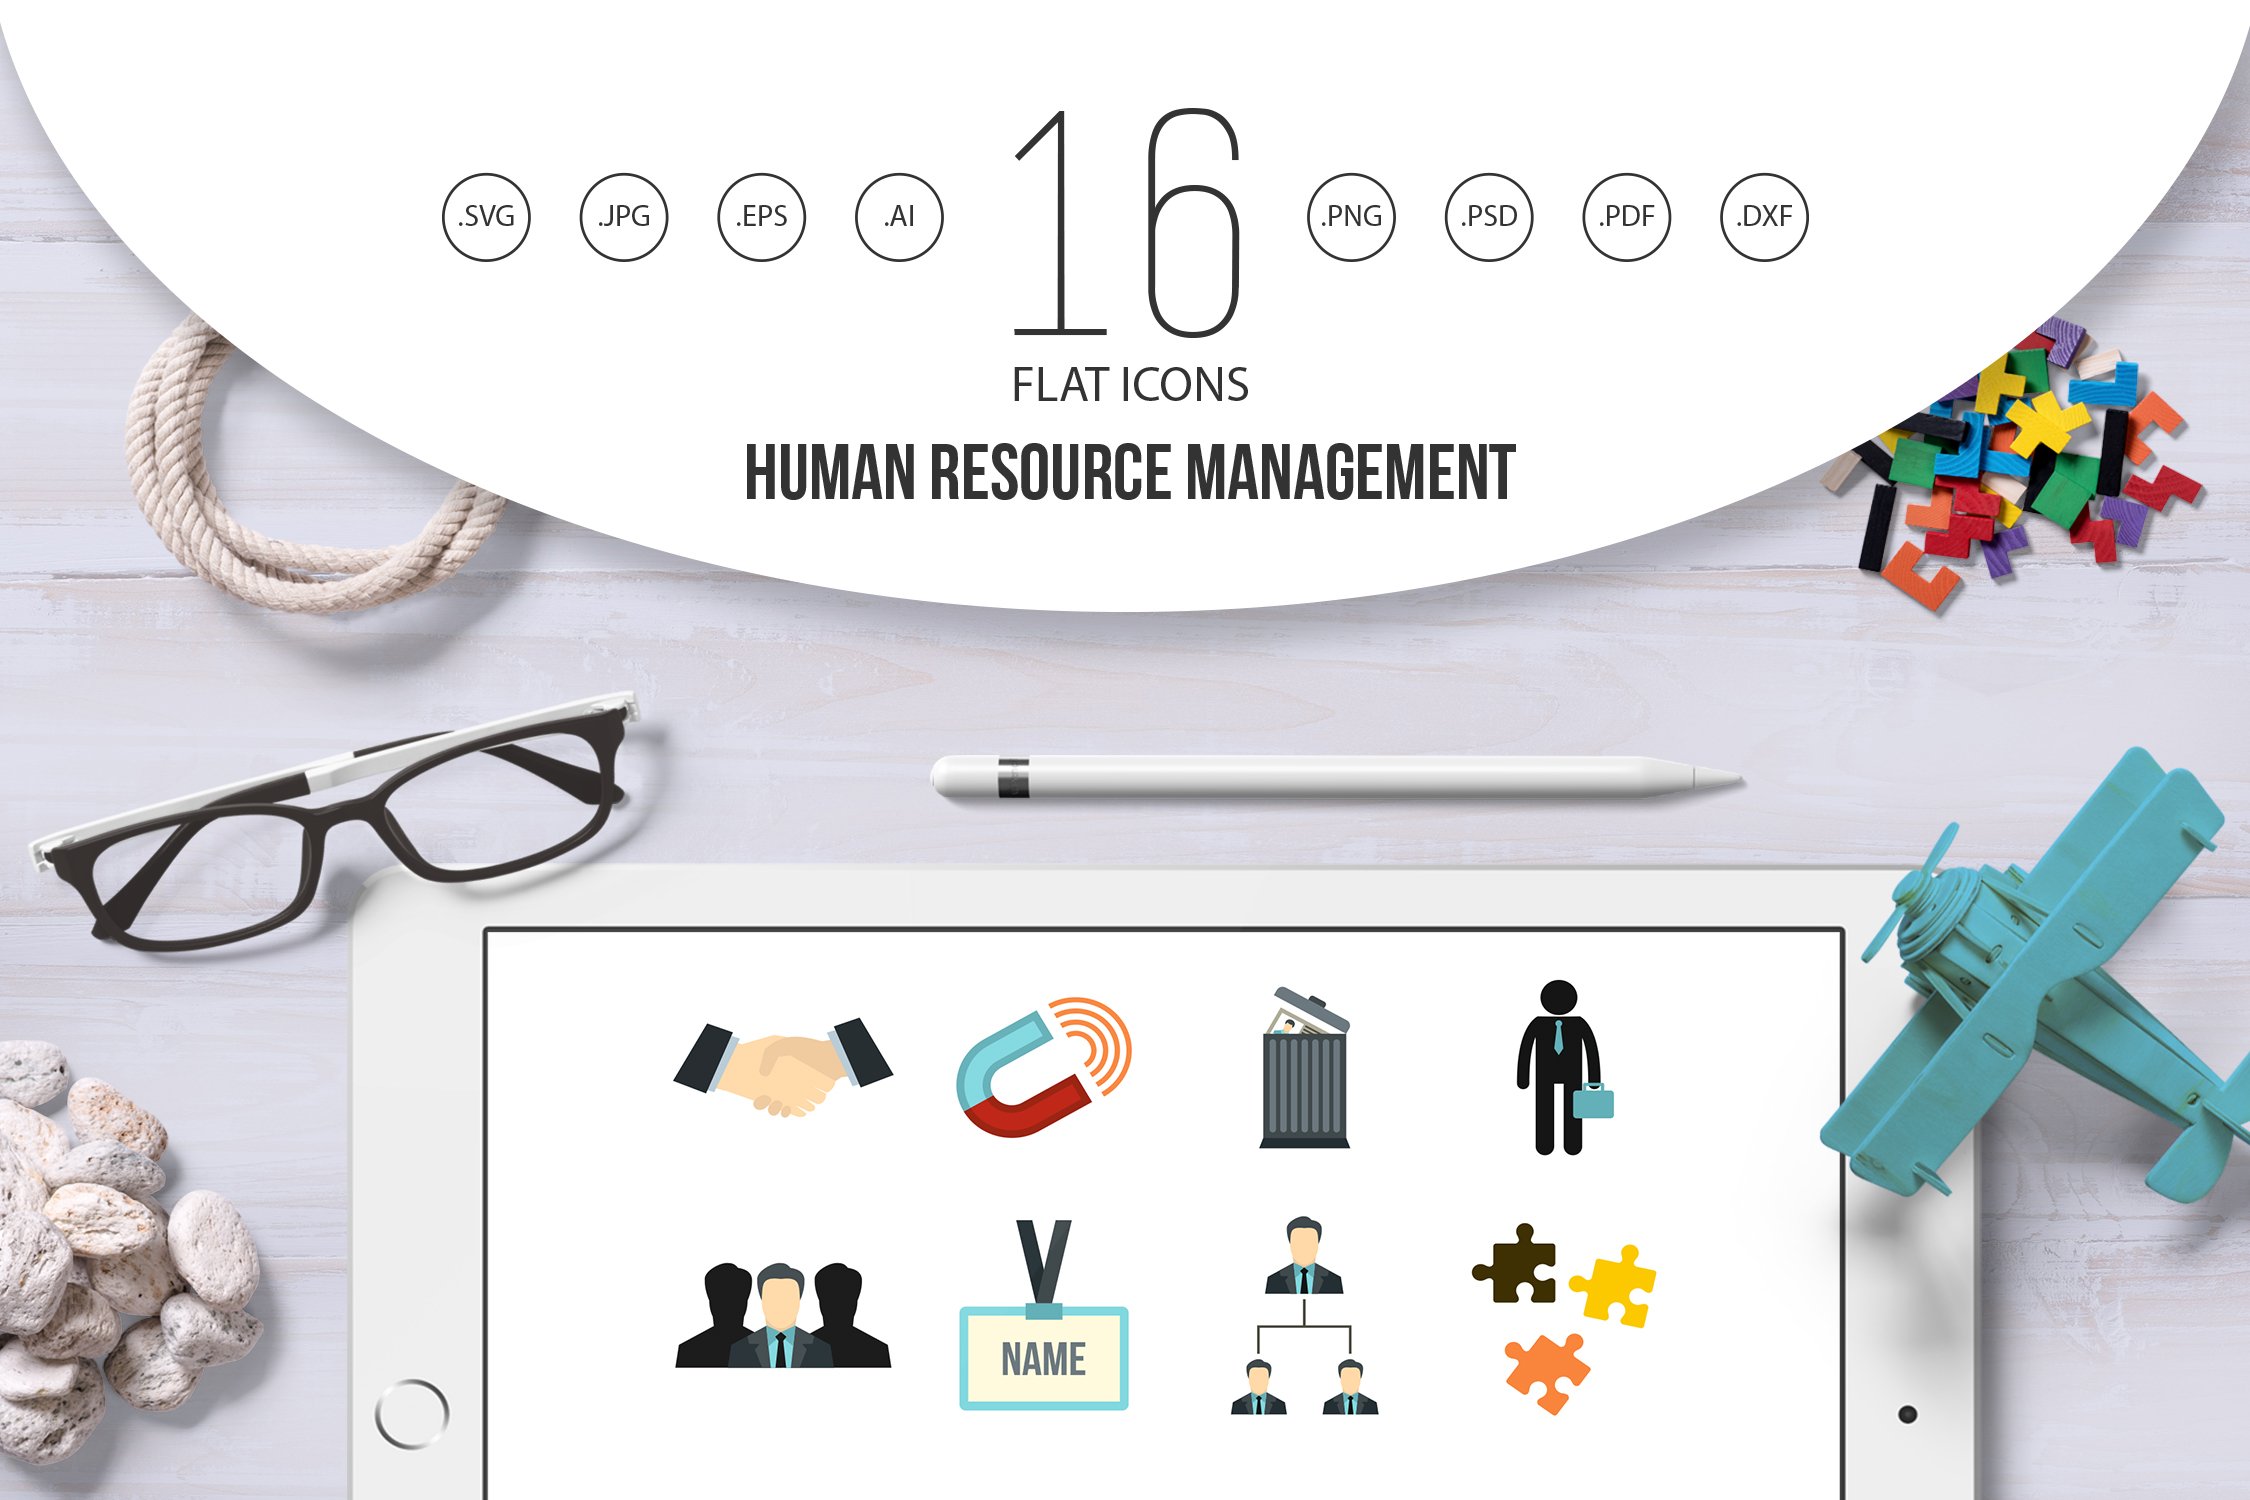 Human resource management icons set cover image.